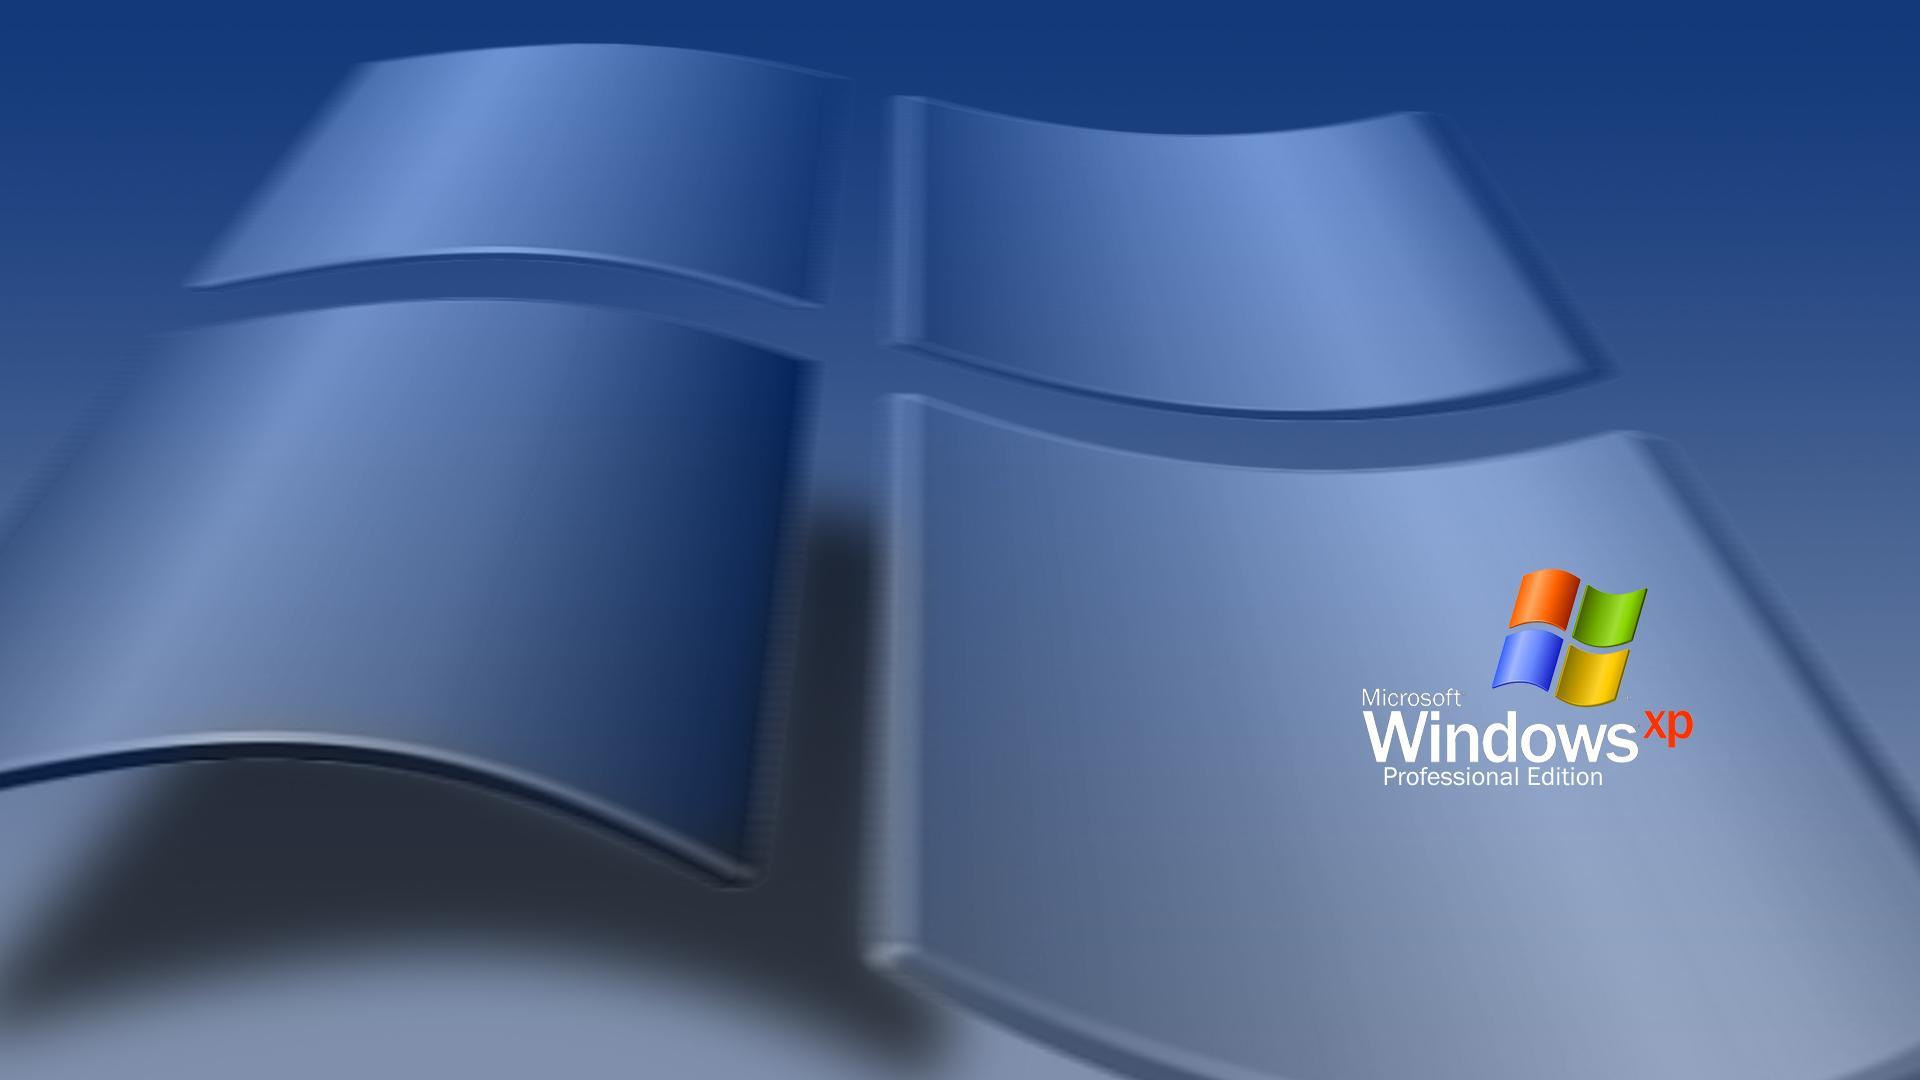 Windows Xp Professional wallpapers